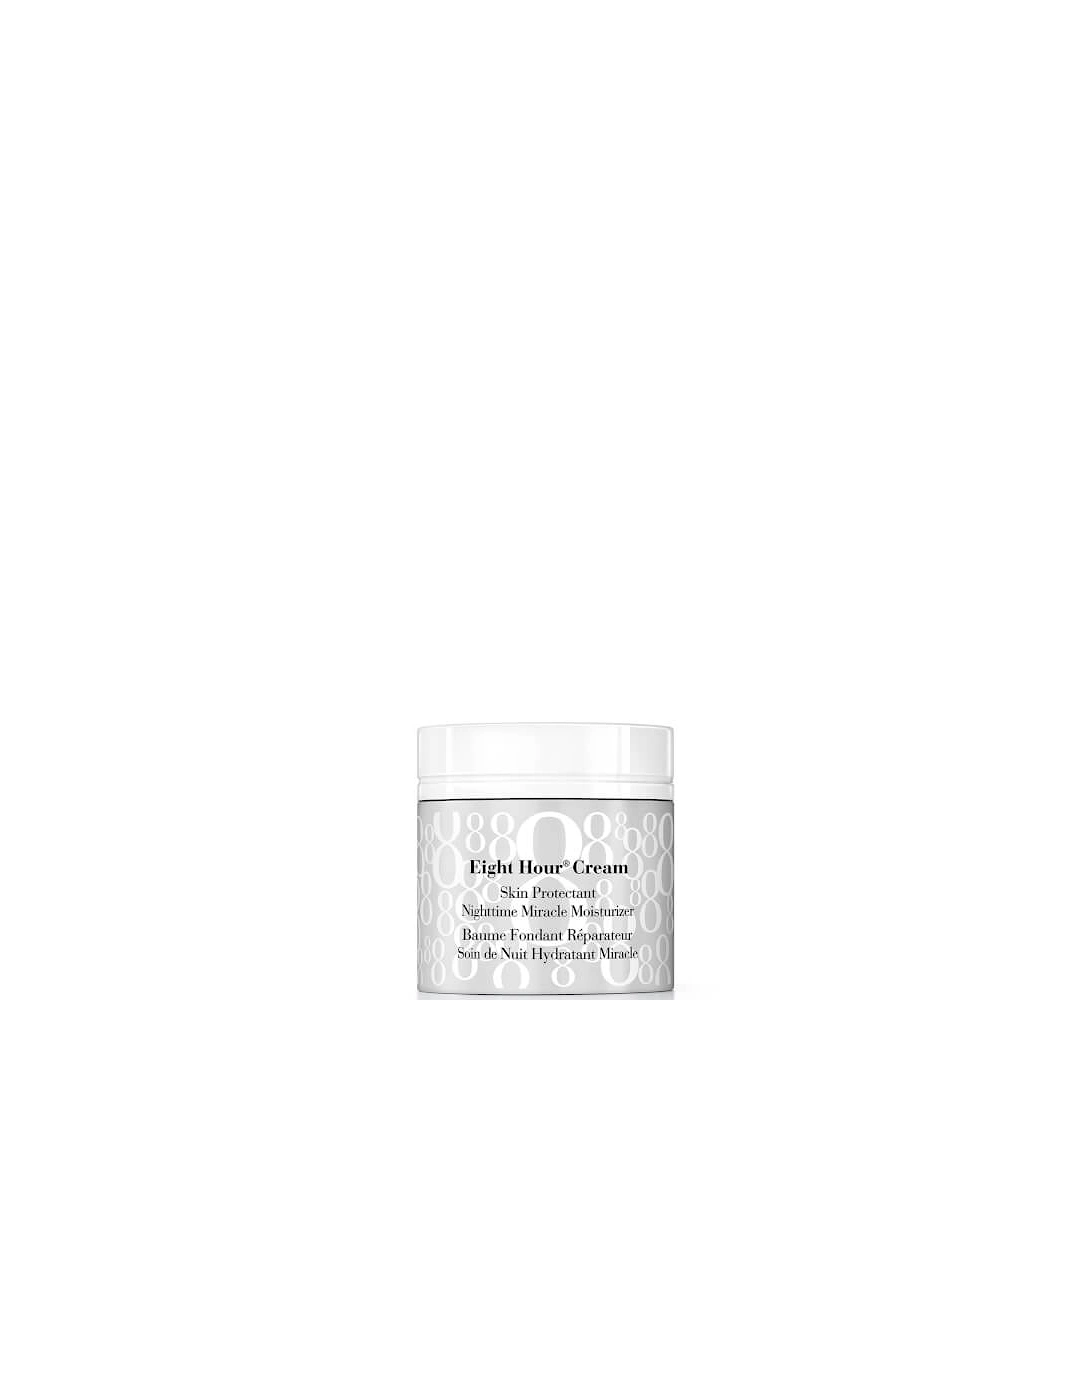 Eight Hour Skin Protectant Night Time Miracle Moisturiser 50ml - - Eight Hour Skin Protectant Night Time Miracle Moisturizer - pc294, 2 of 1